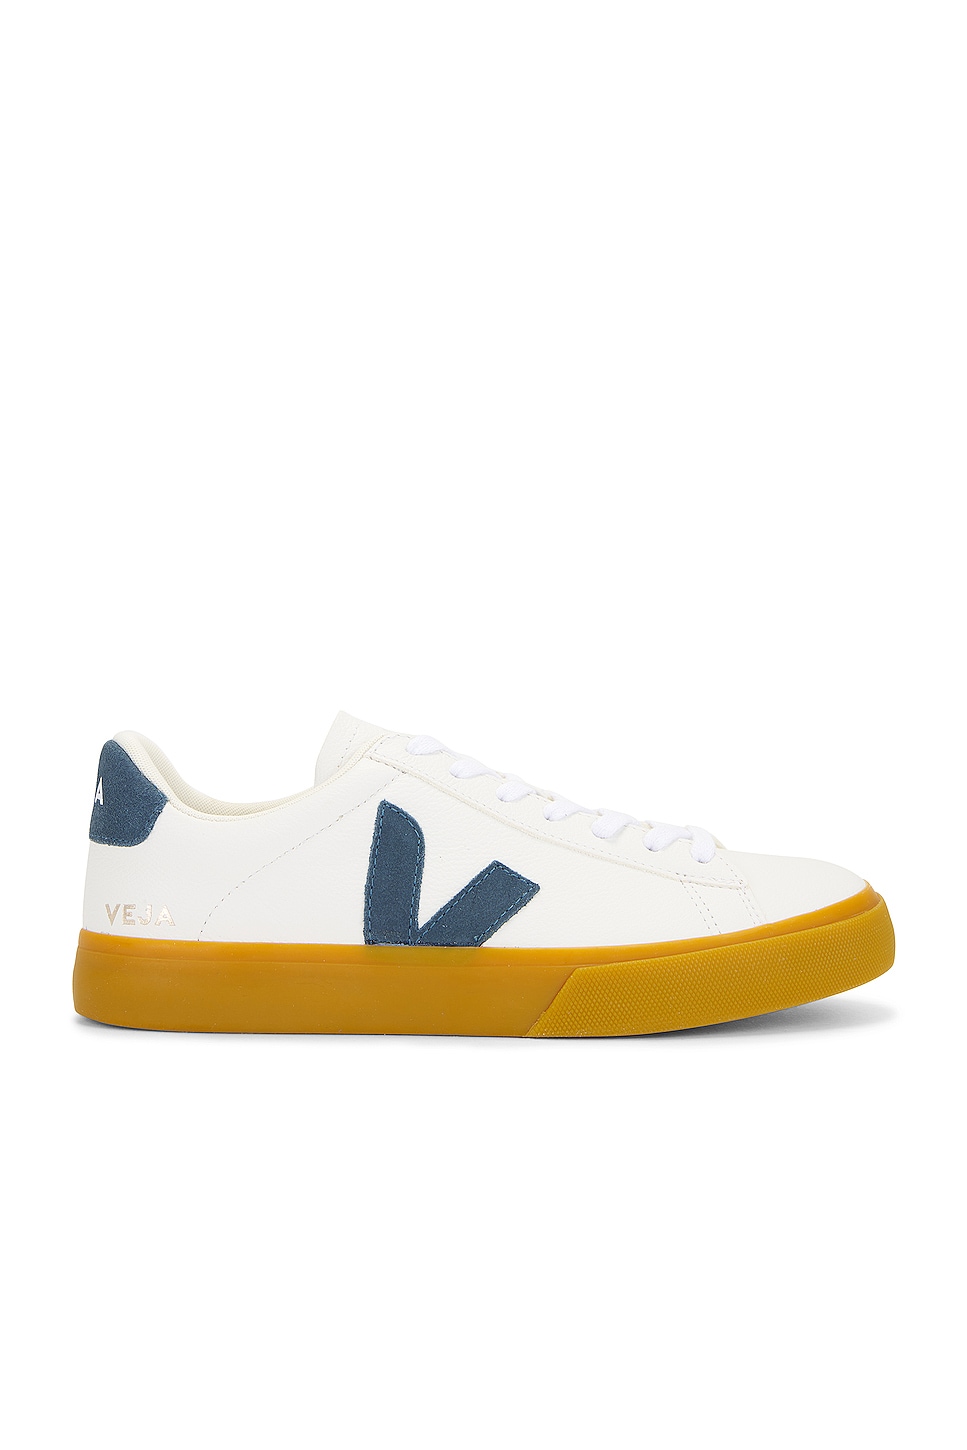 Image 1 of Veja Campo Sneaker in Extra White & California Natural